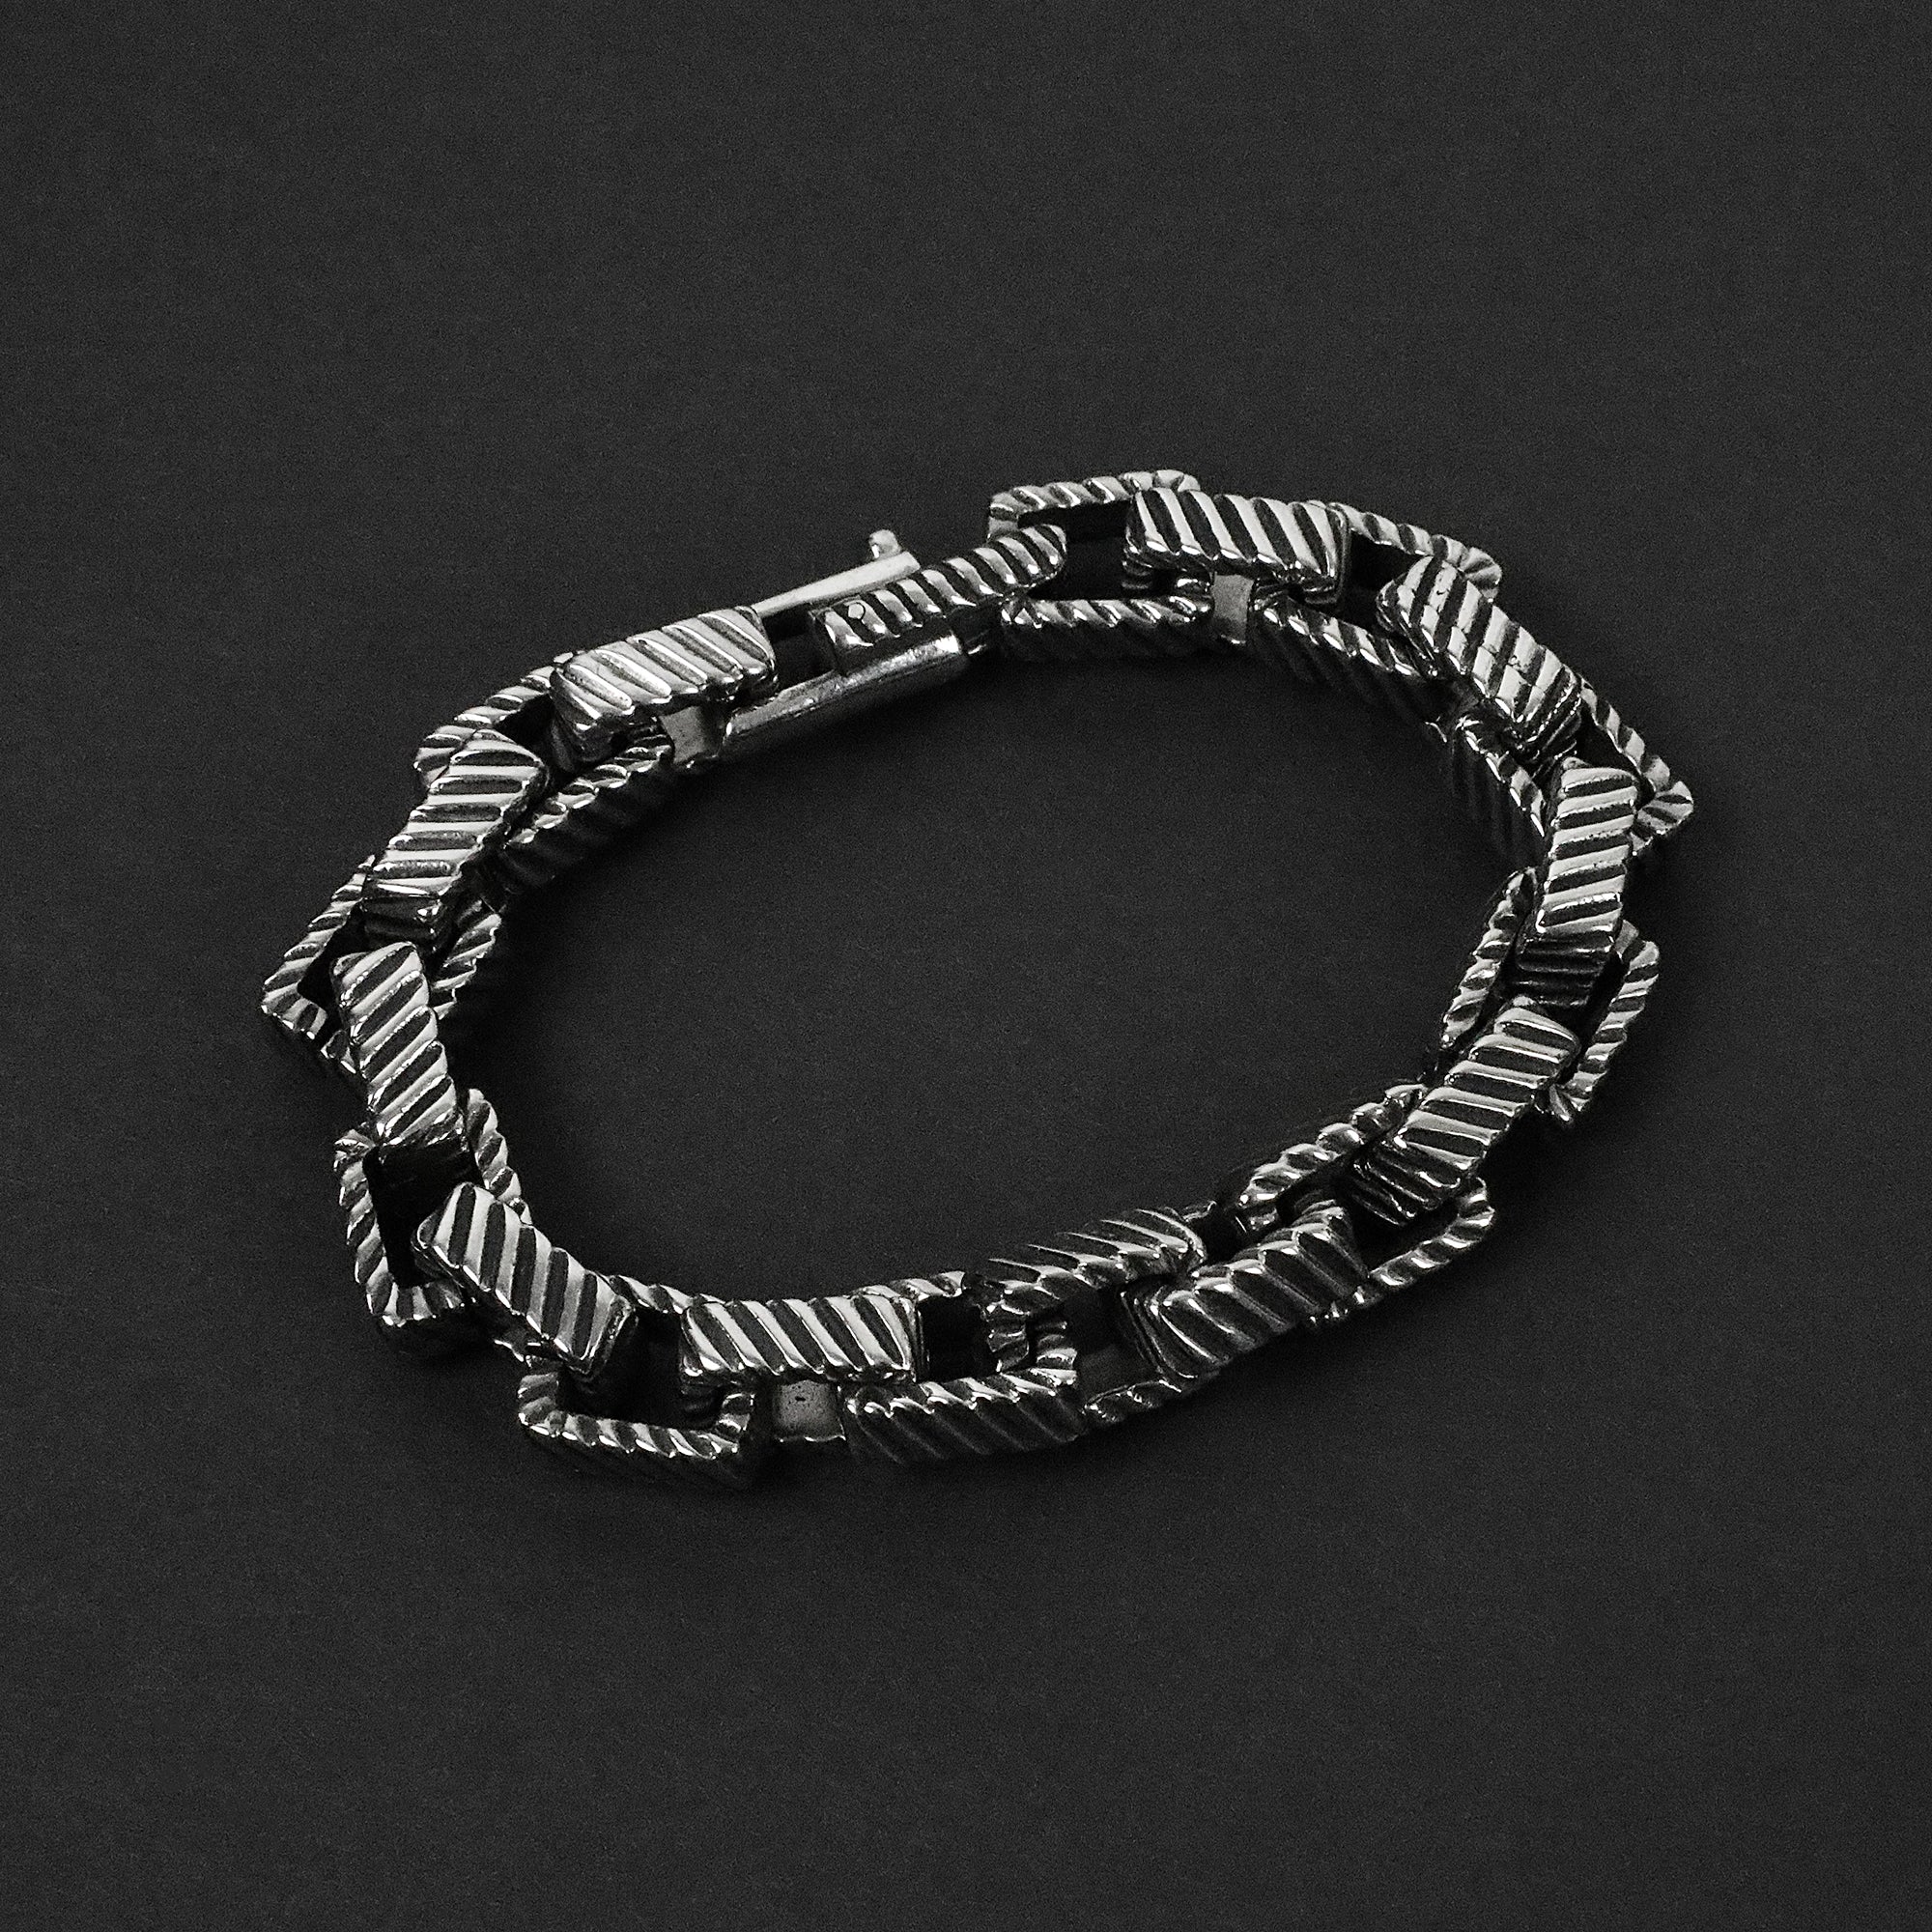 Rugged Chain Bracelet - Silver 12mm